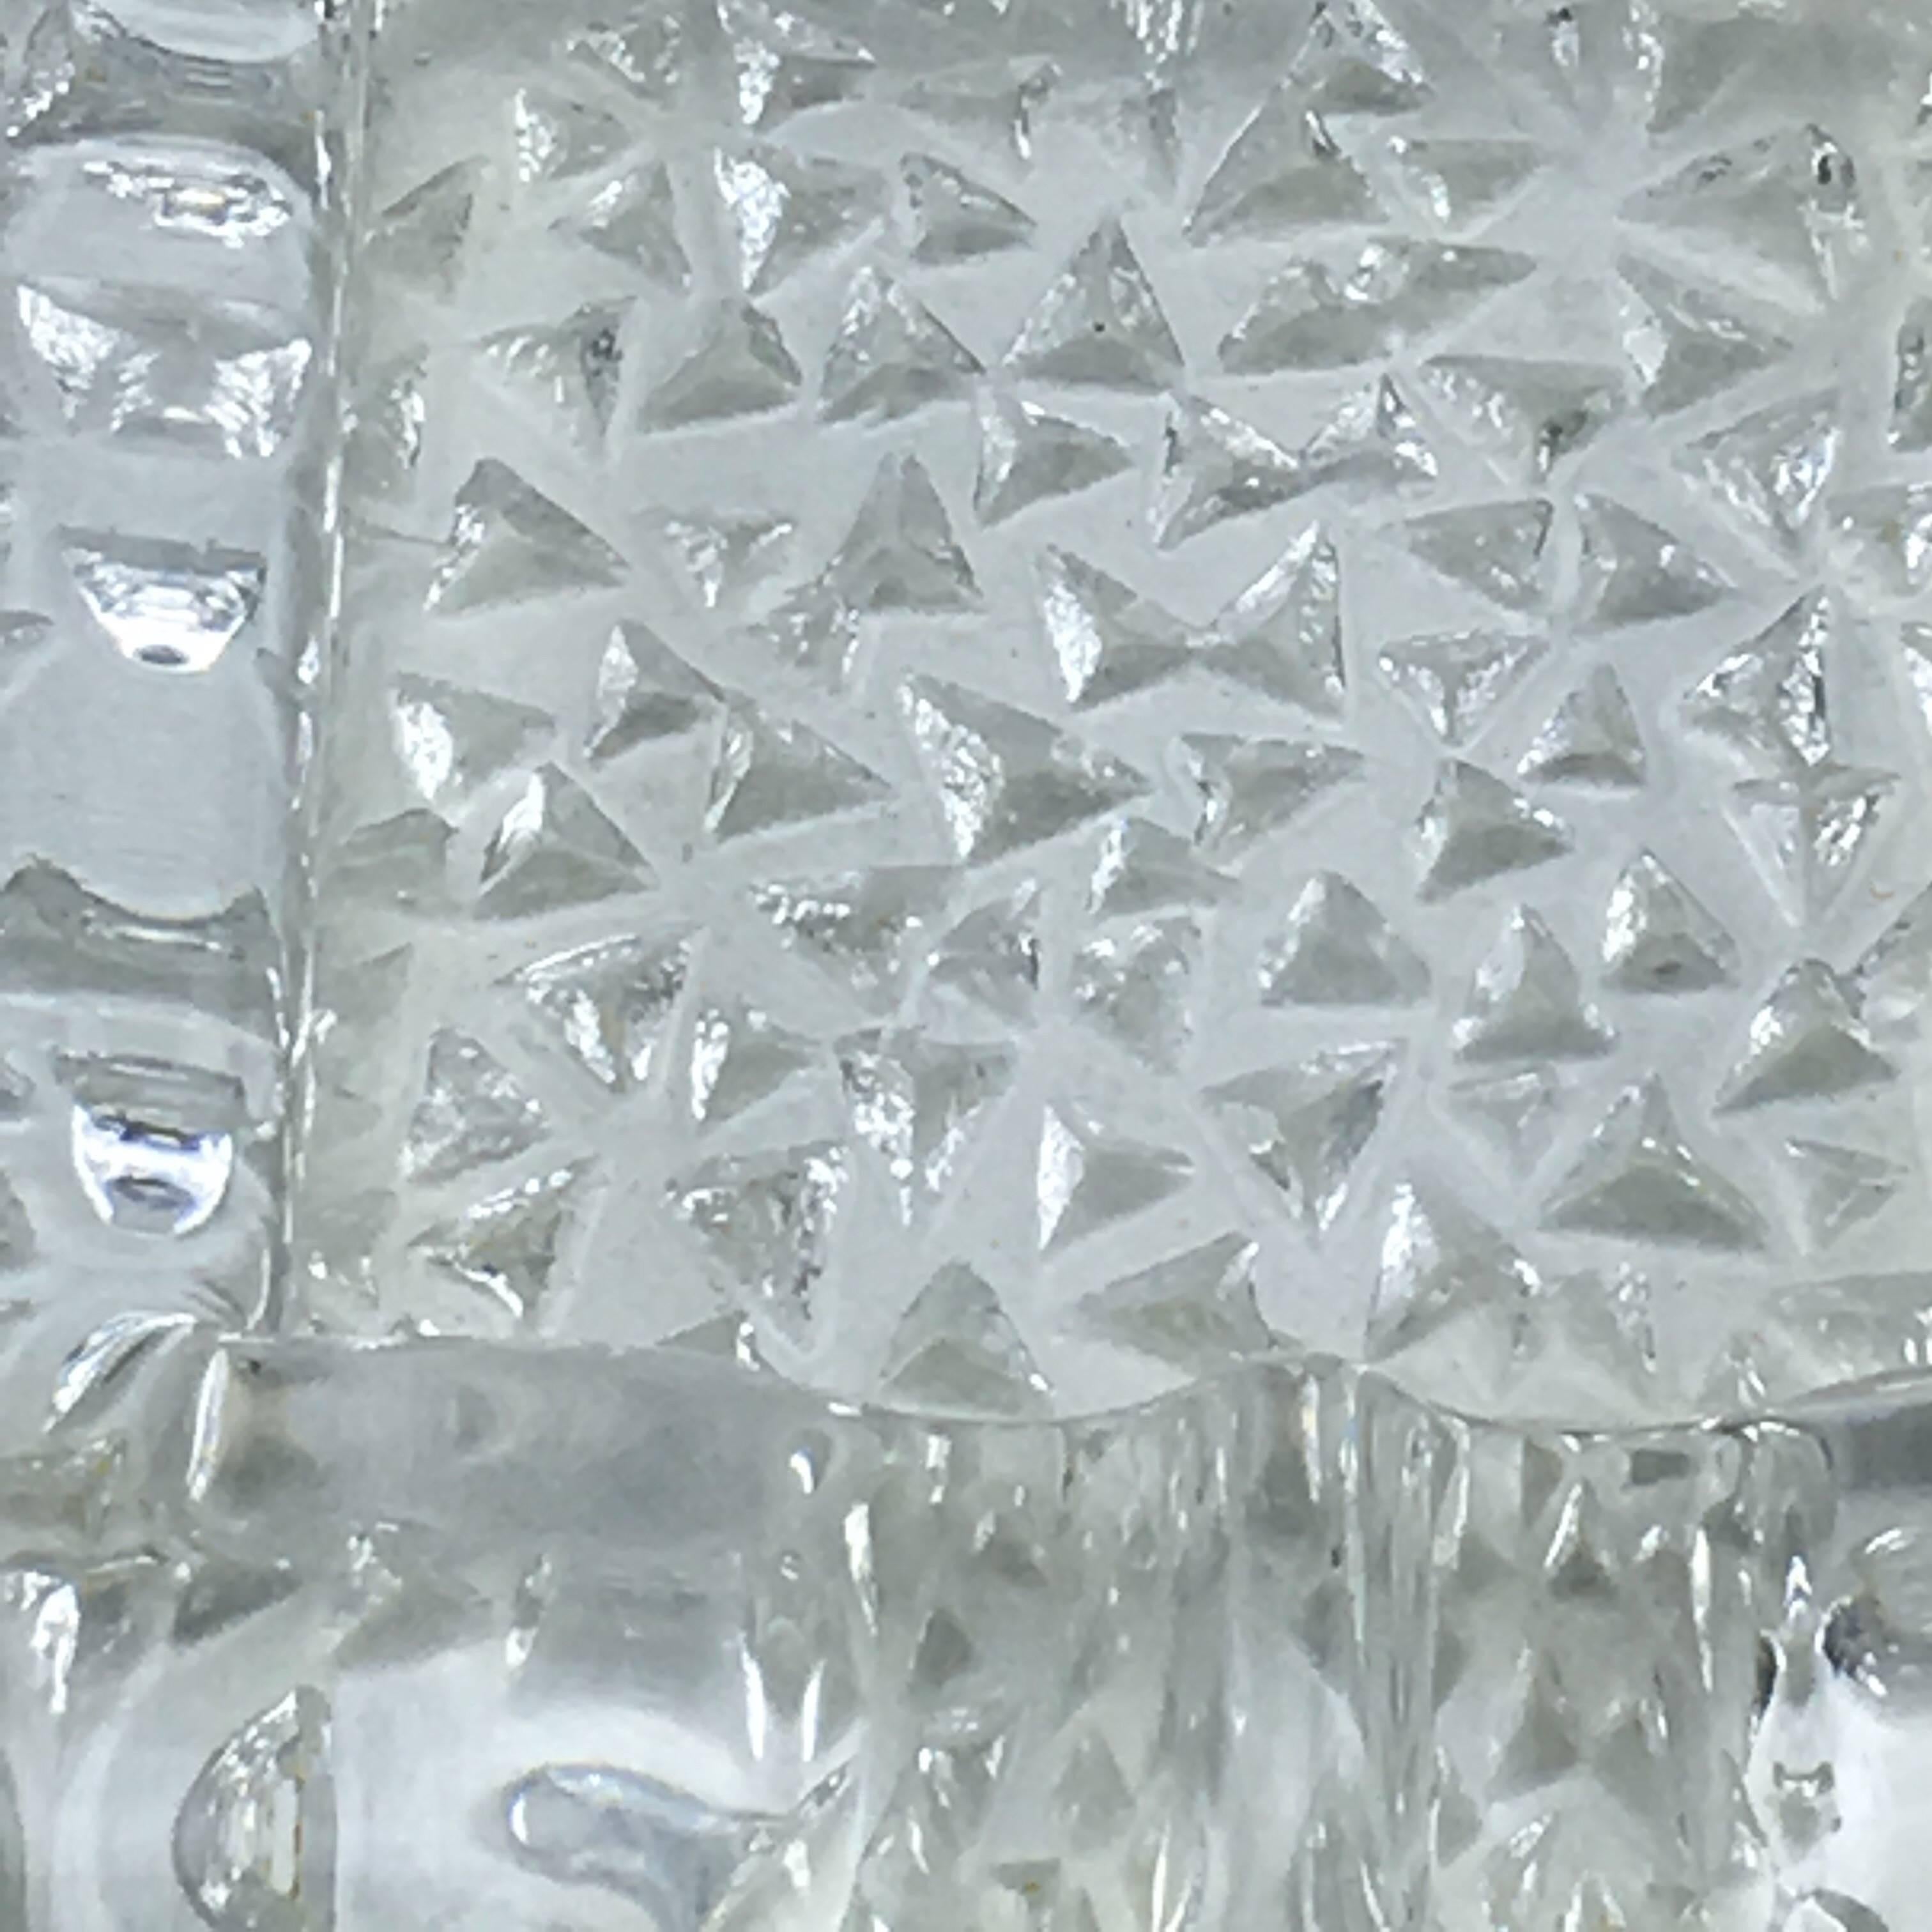 Very nice, glasses patterns. It gives the impression we have a of kinetic piece.
A luxury decoration for your tables.
Crystal of Portieux has been existing since 1706, it is an old tradition of glass makers.